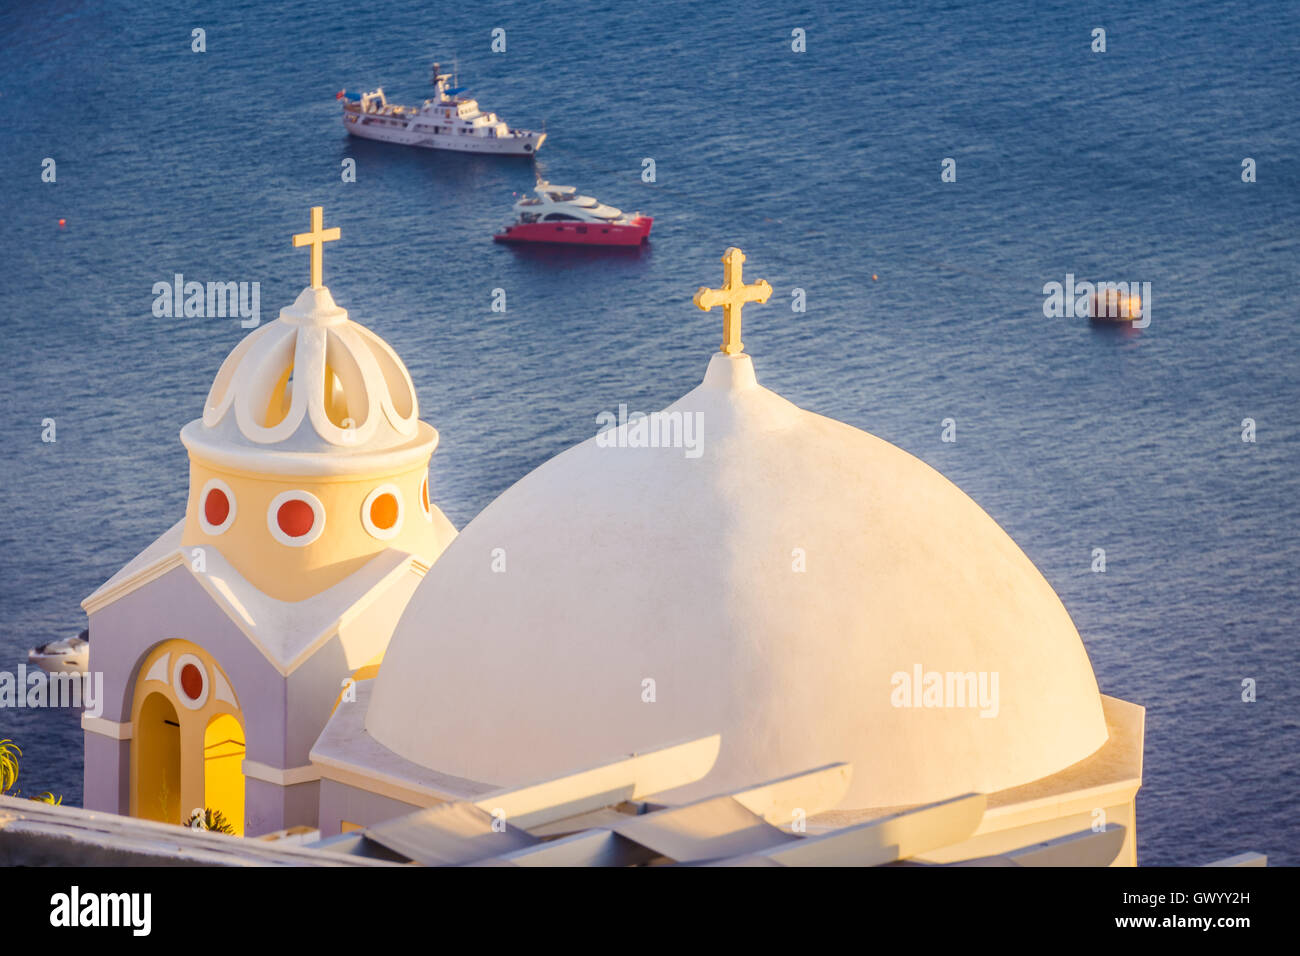 Iconic church of Santorini, Greece. Santorini is an ancient volcano located in the middle of the mediterranean sea, surrounded b Stock Photo